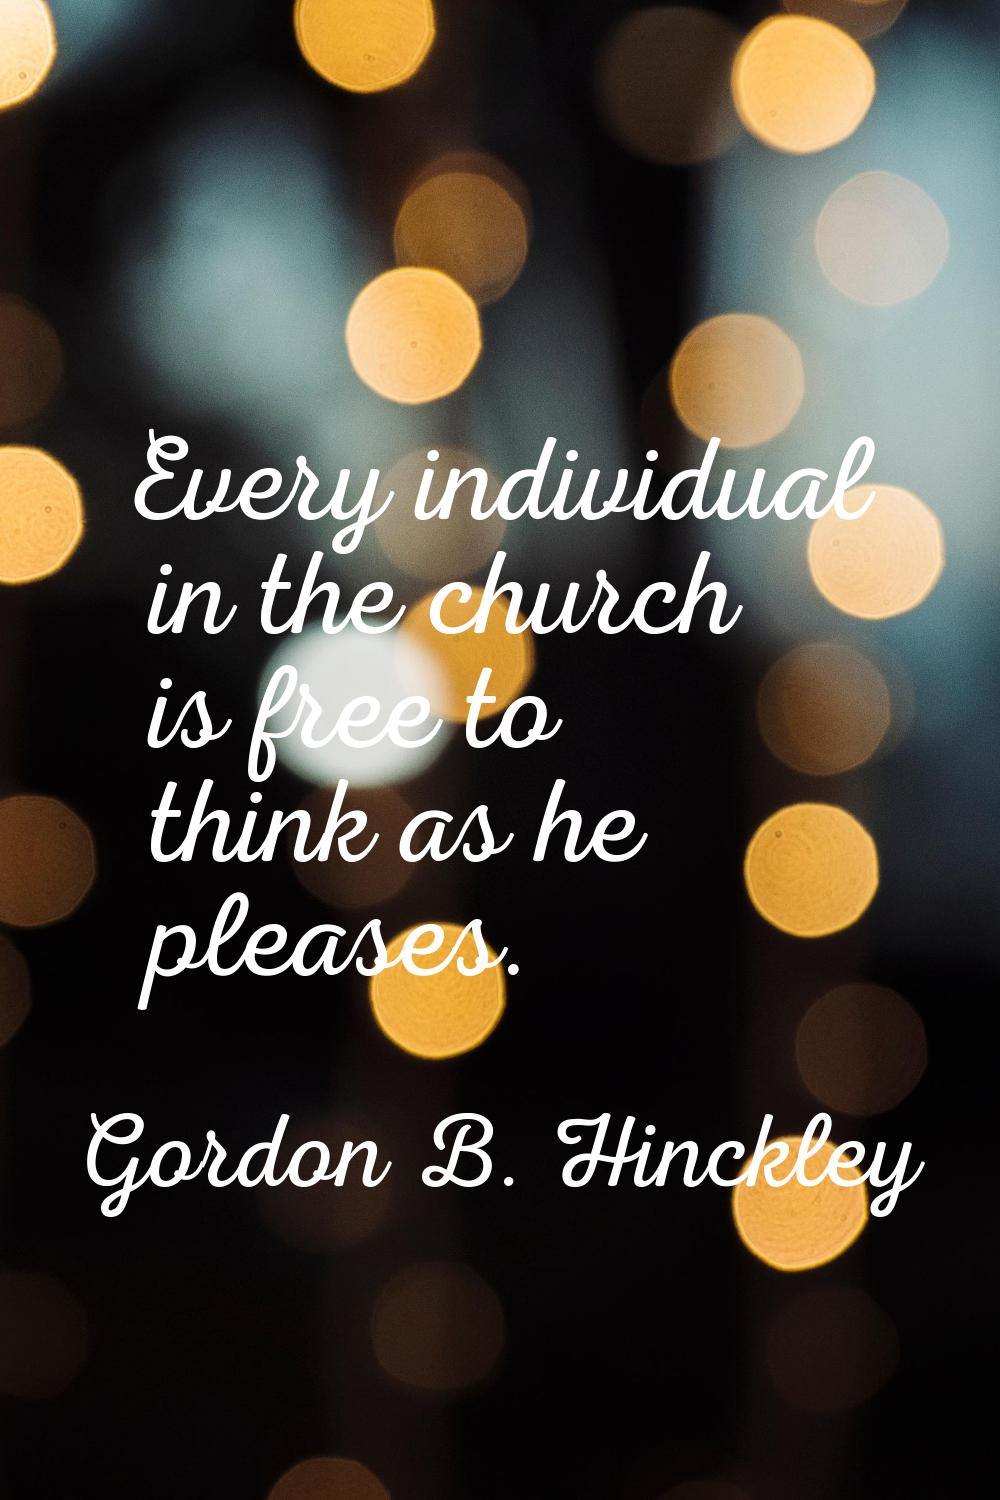 Every individual in the church is free to think as he pleases.